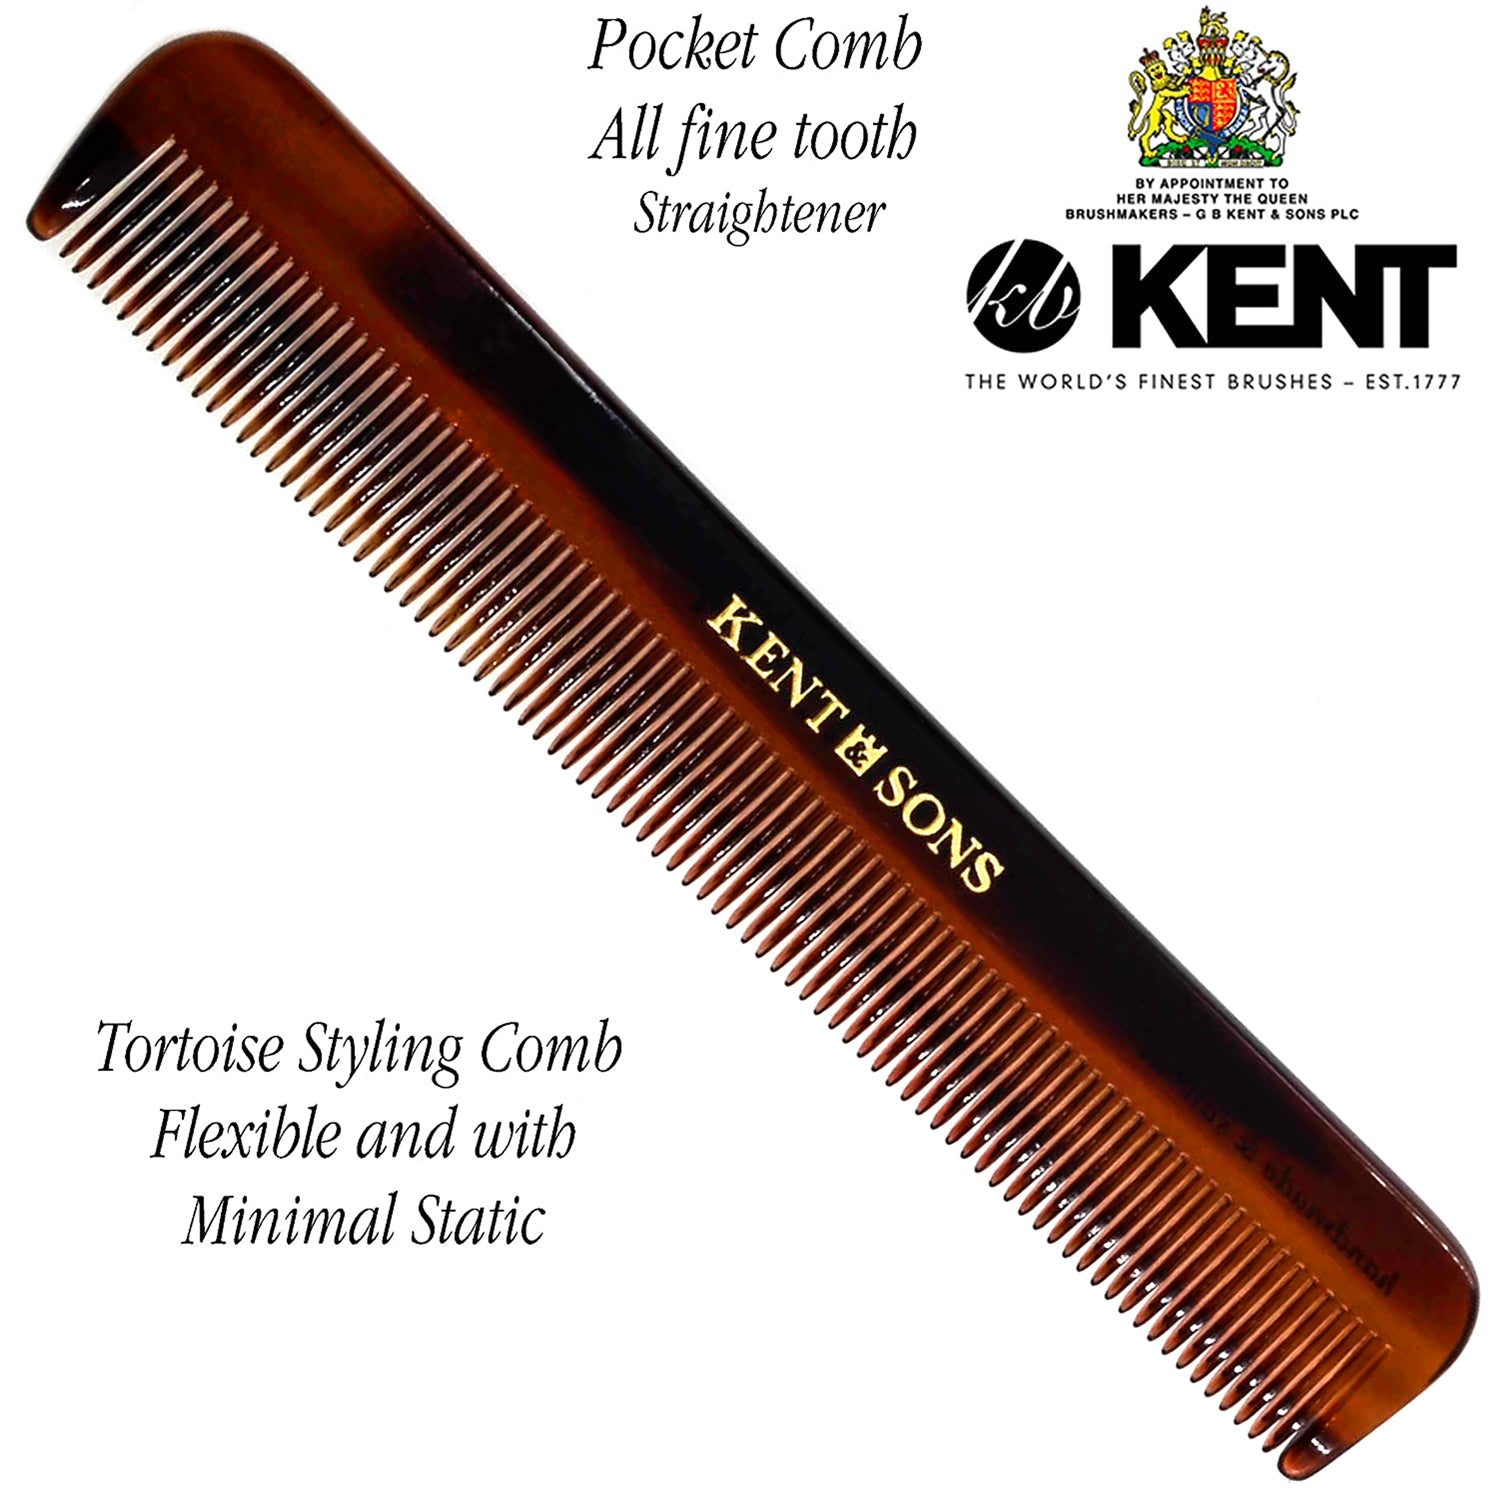 4.5" Handmade Fine Tooth Styling Pocket Comb